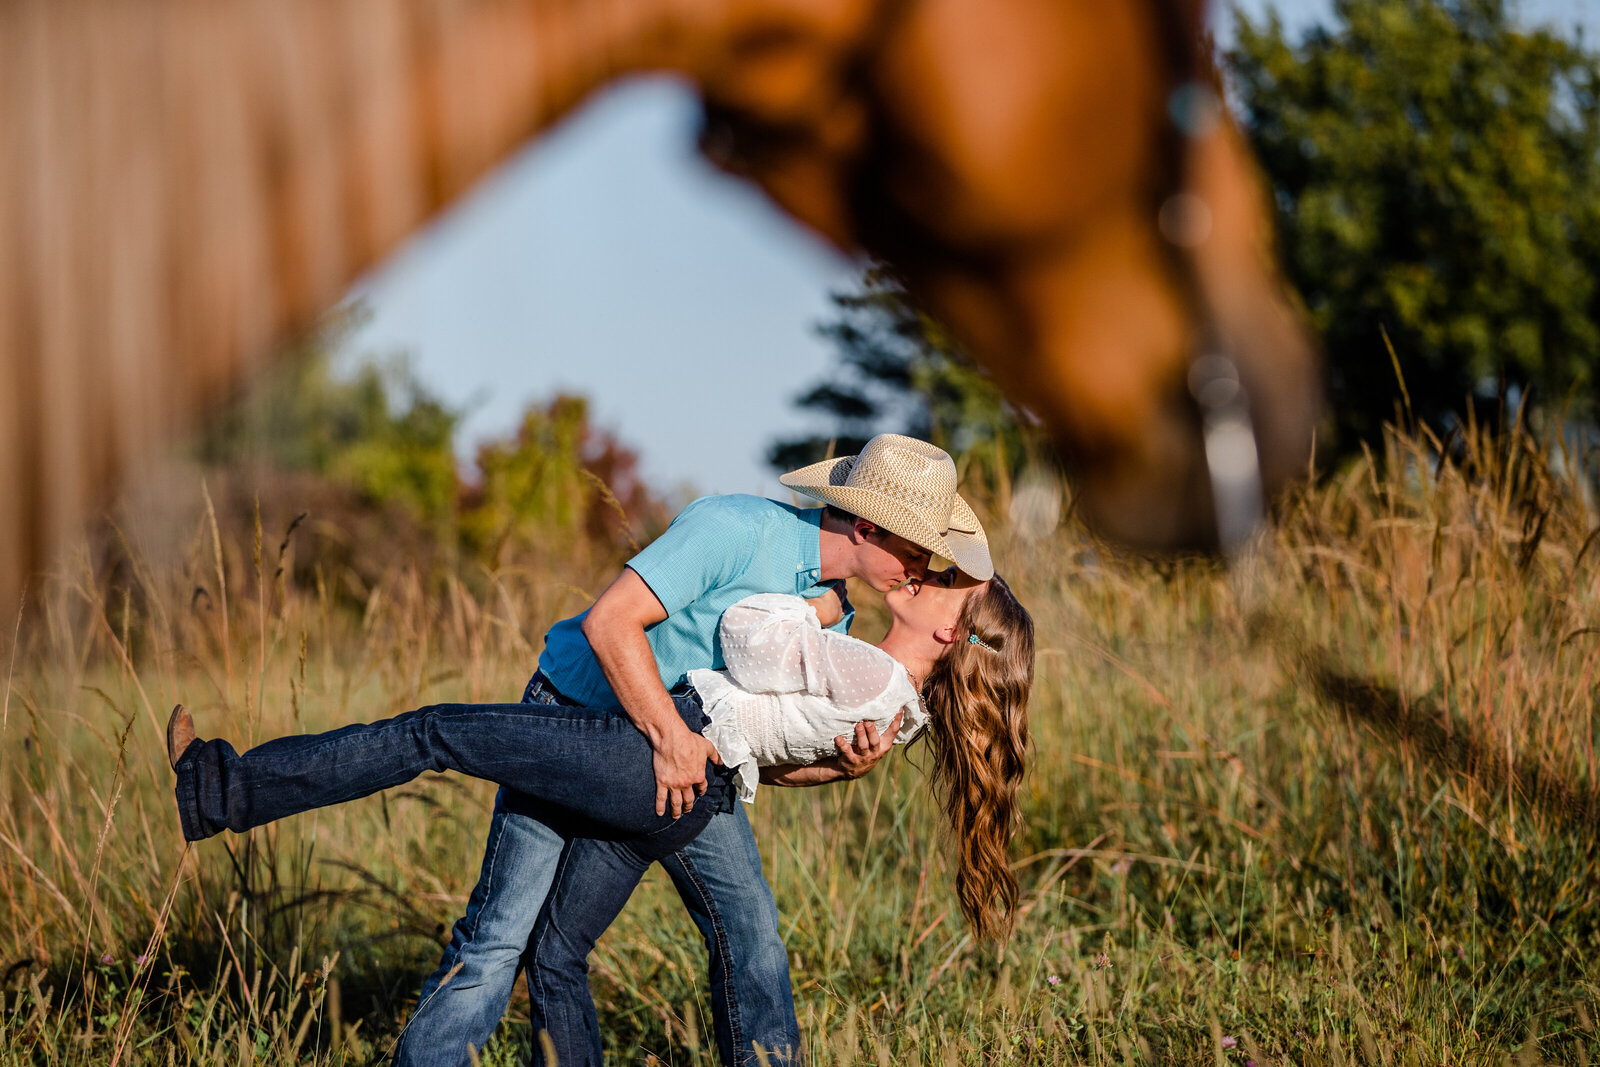 Cowboy dipping girl with horse in foreground